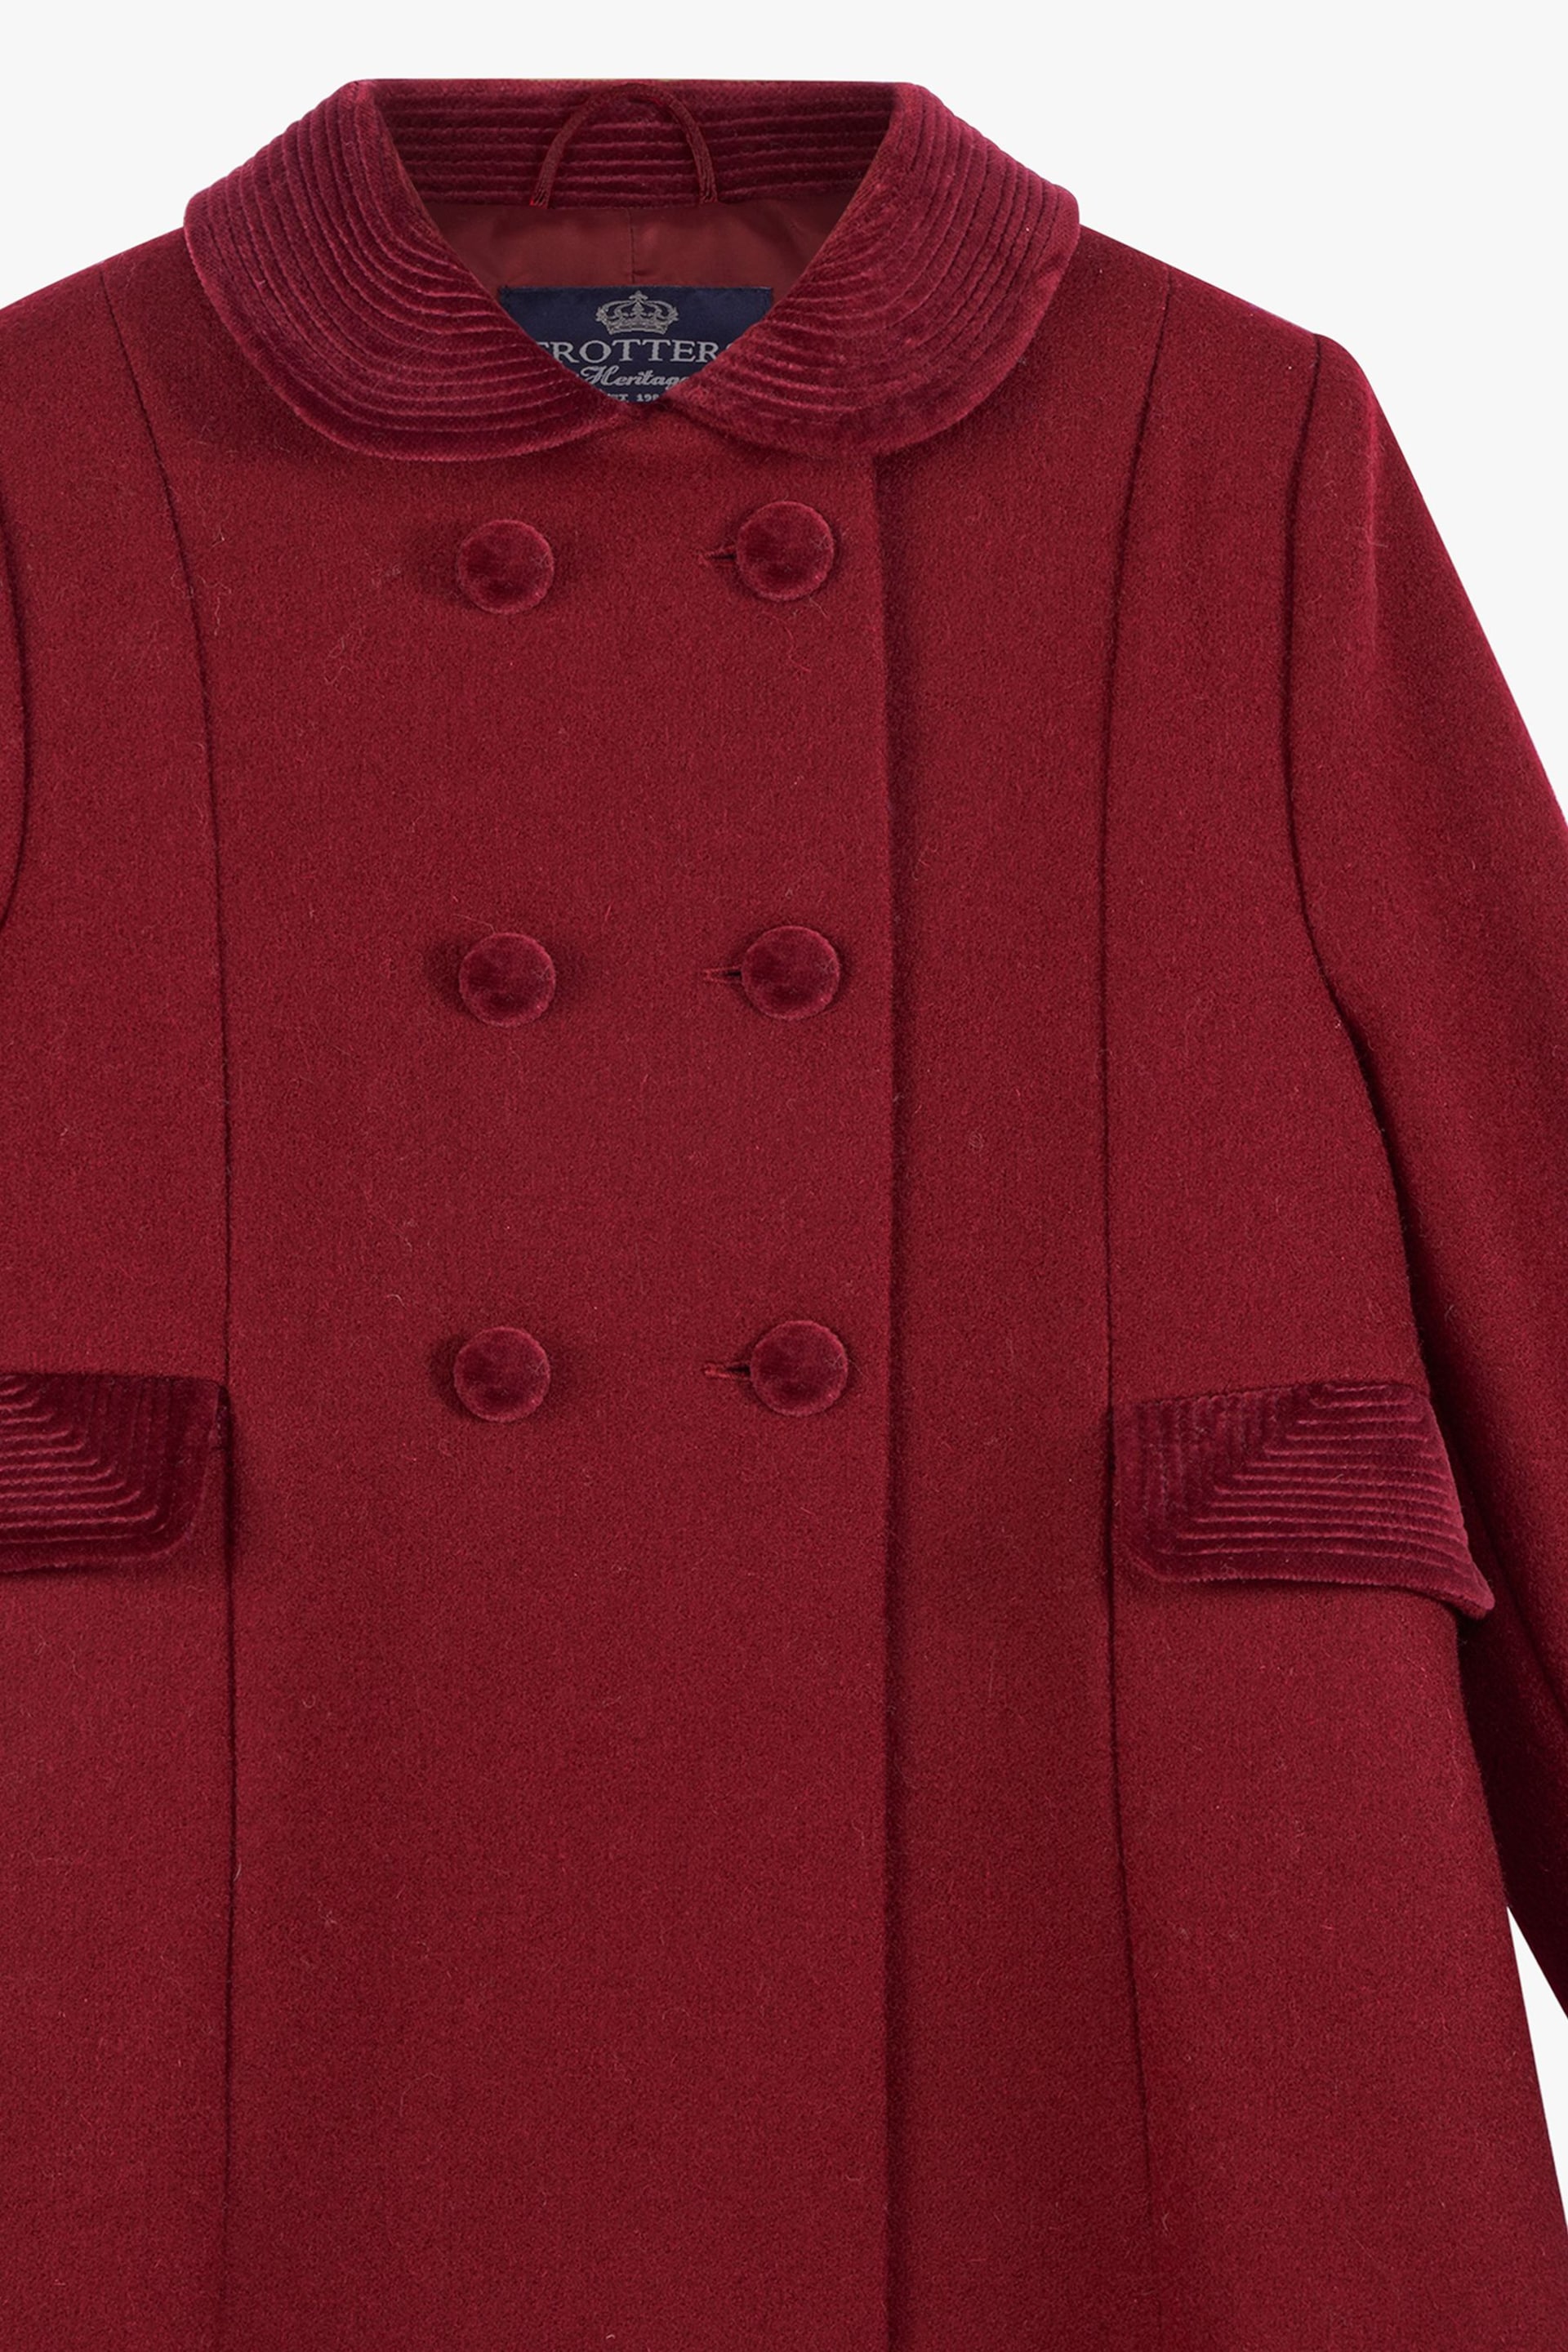 Trotters London Red Burgundy Classic Wool Coat - Image 7 of 7